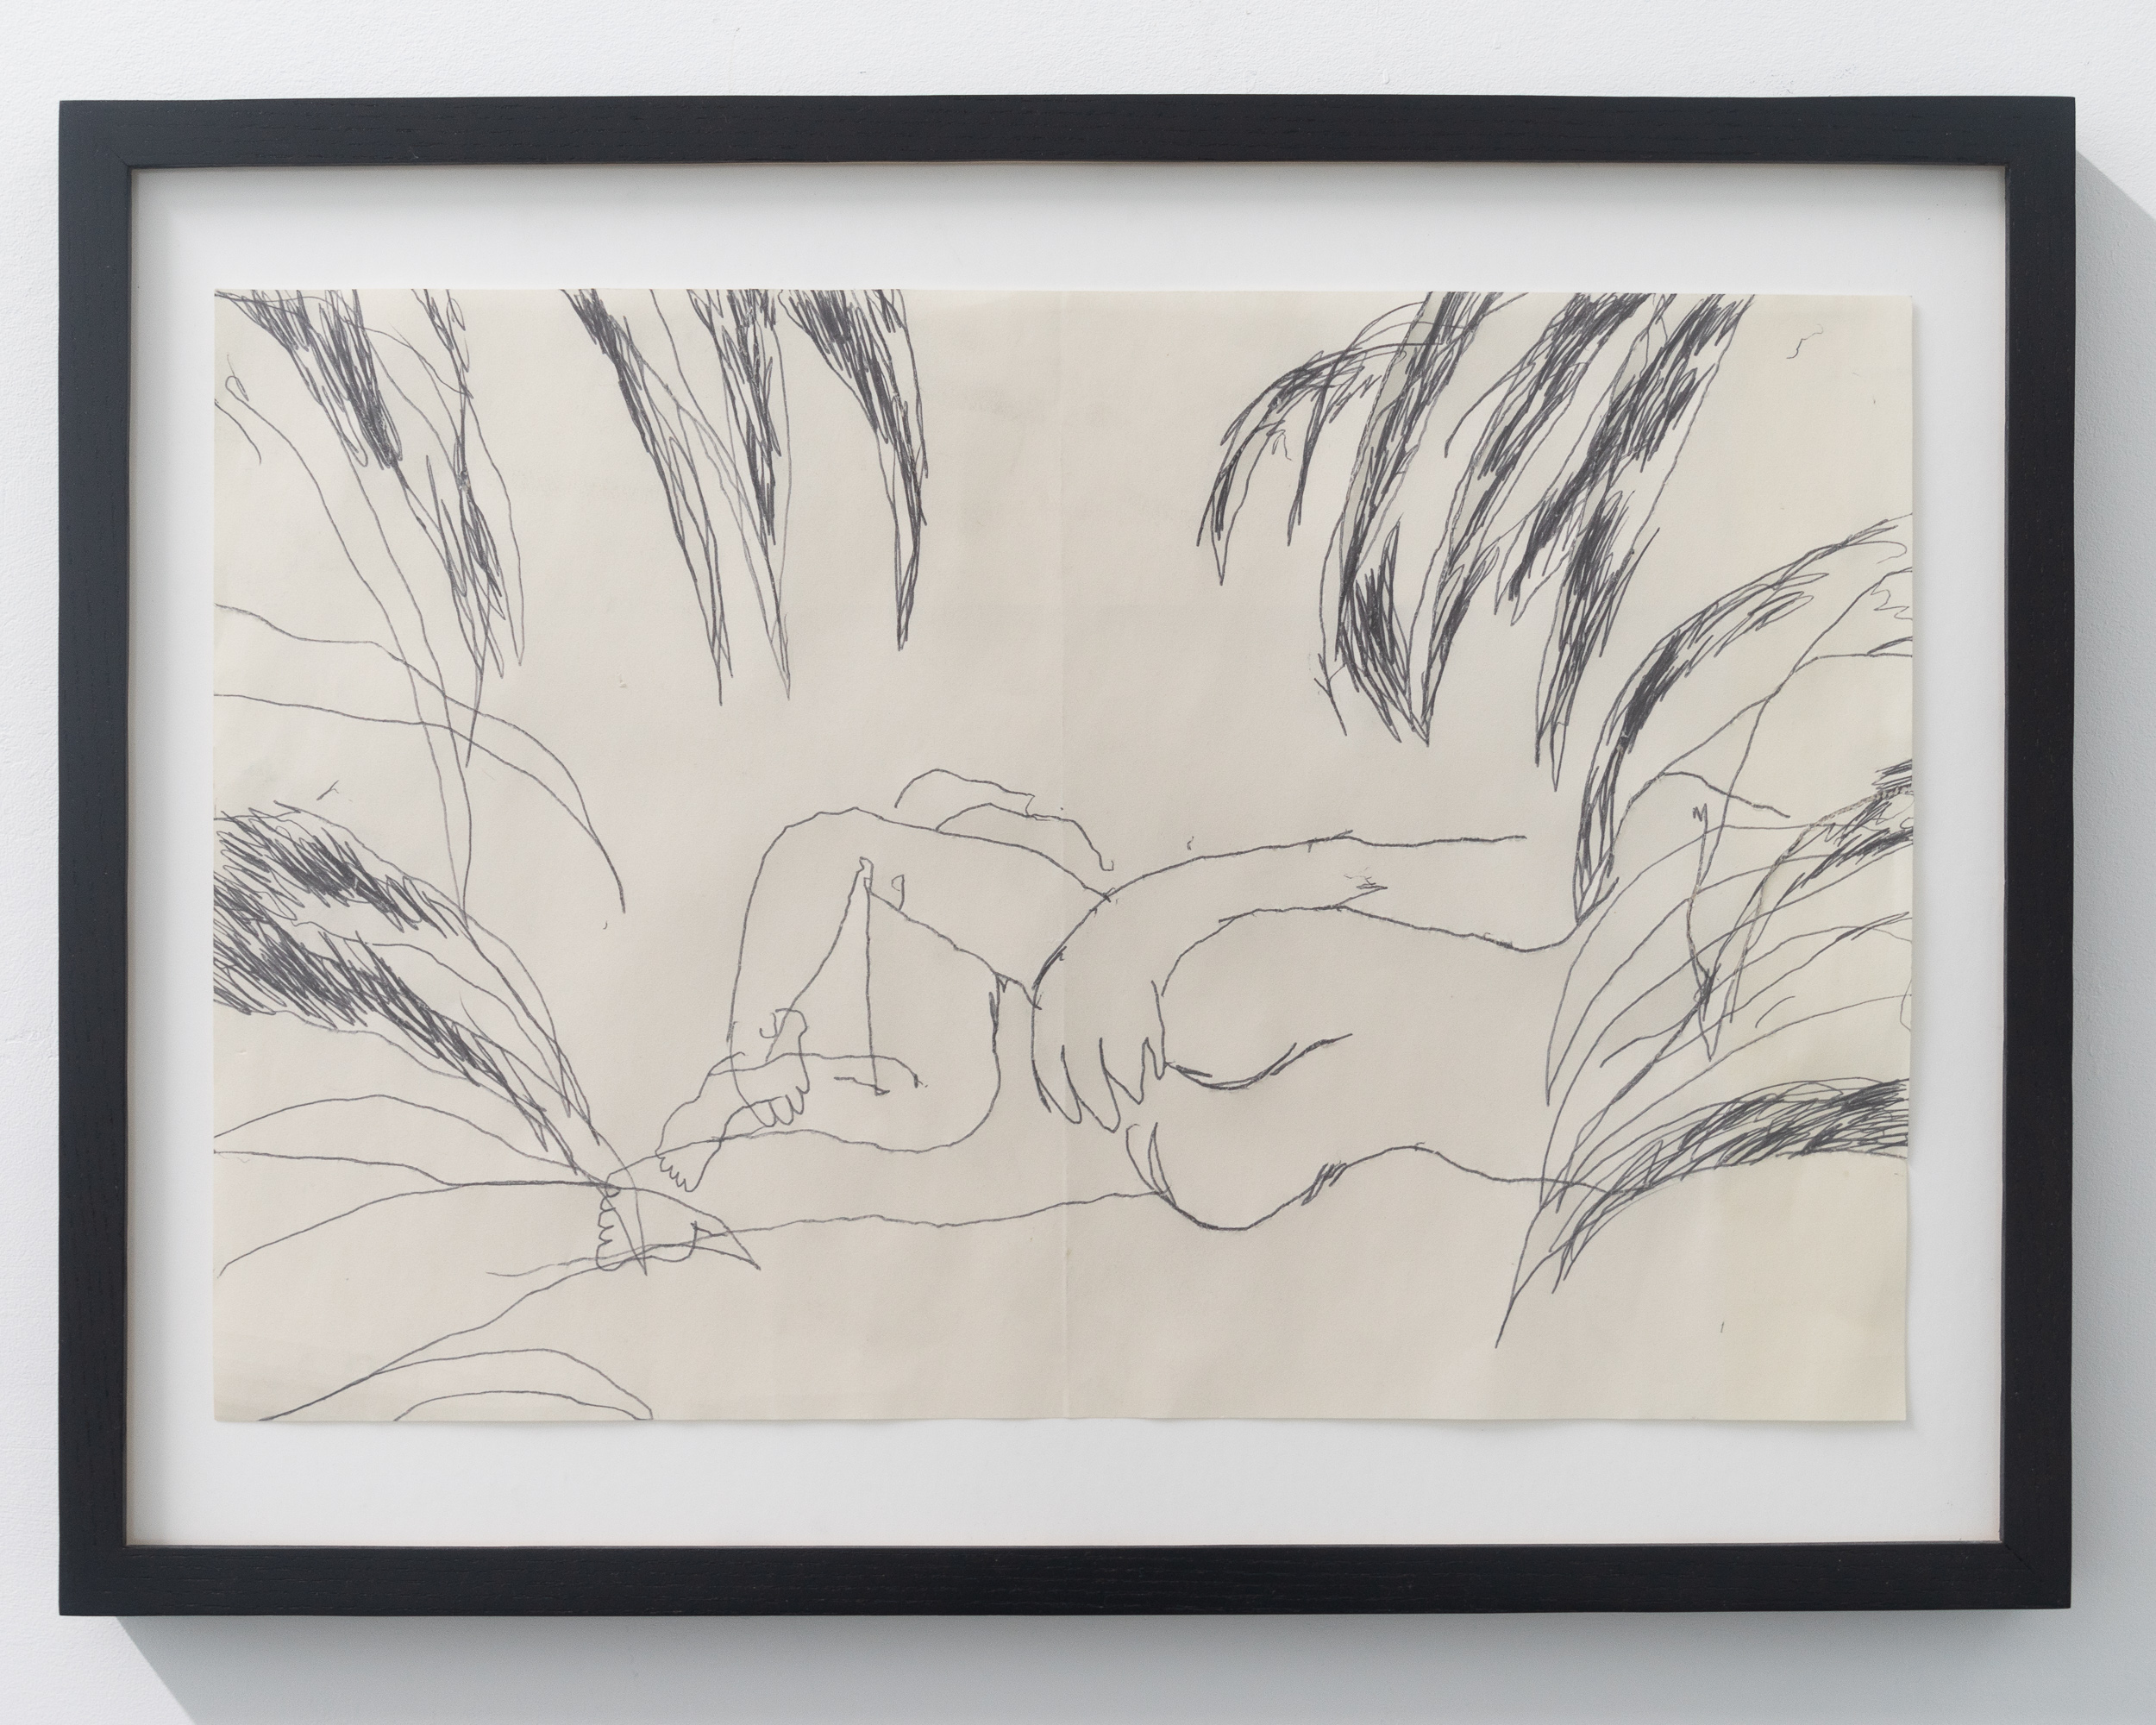  Emilie Gossiaux,  In the Bushes , 2018, ink on newsprint, 16 x 21 1/4 inches 